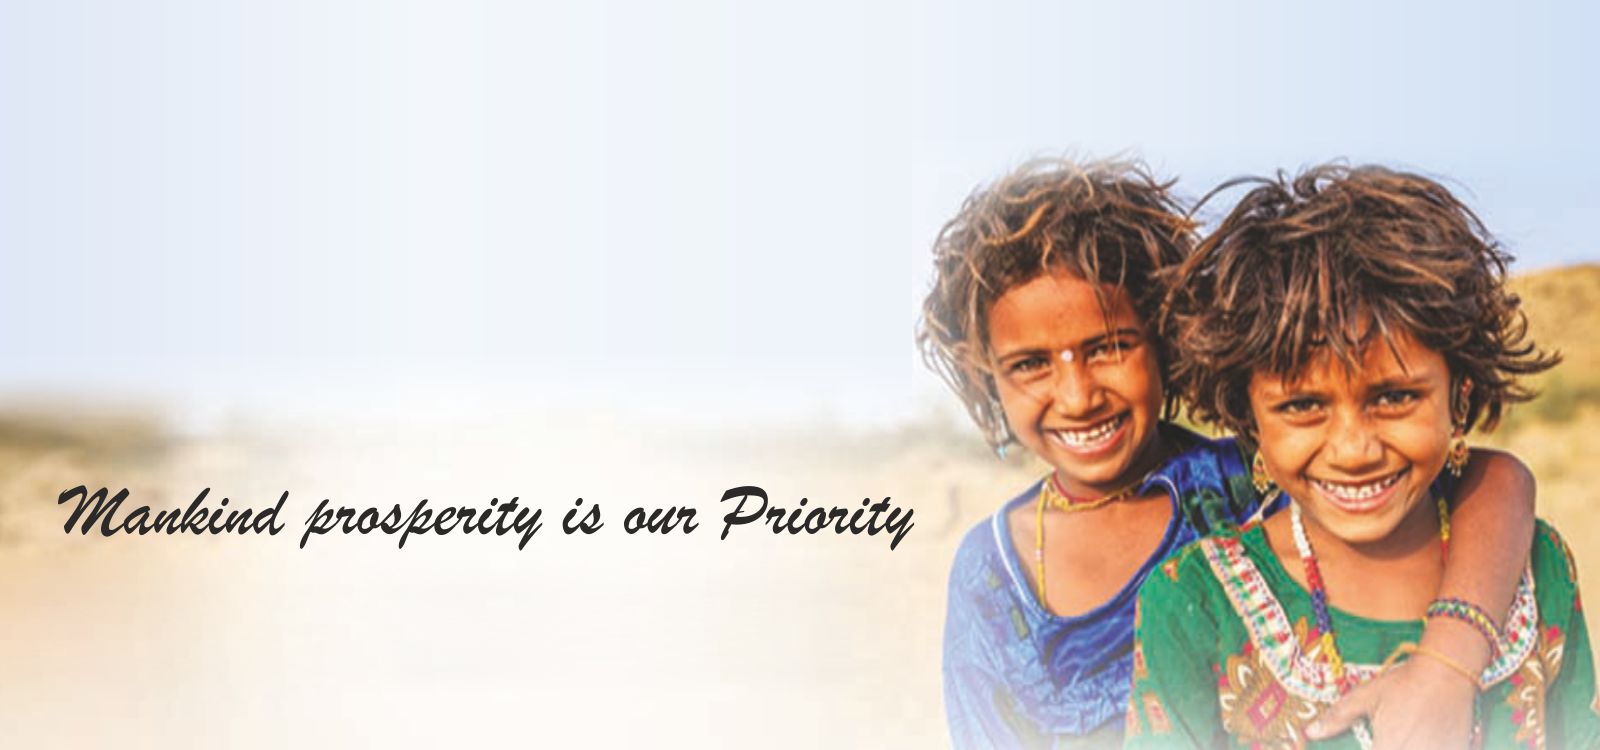 Mankind Prosperity Is Our Priority